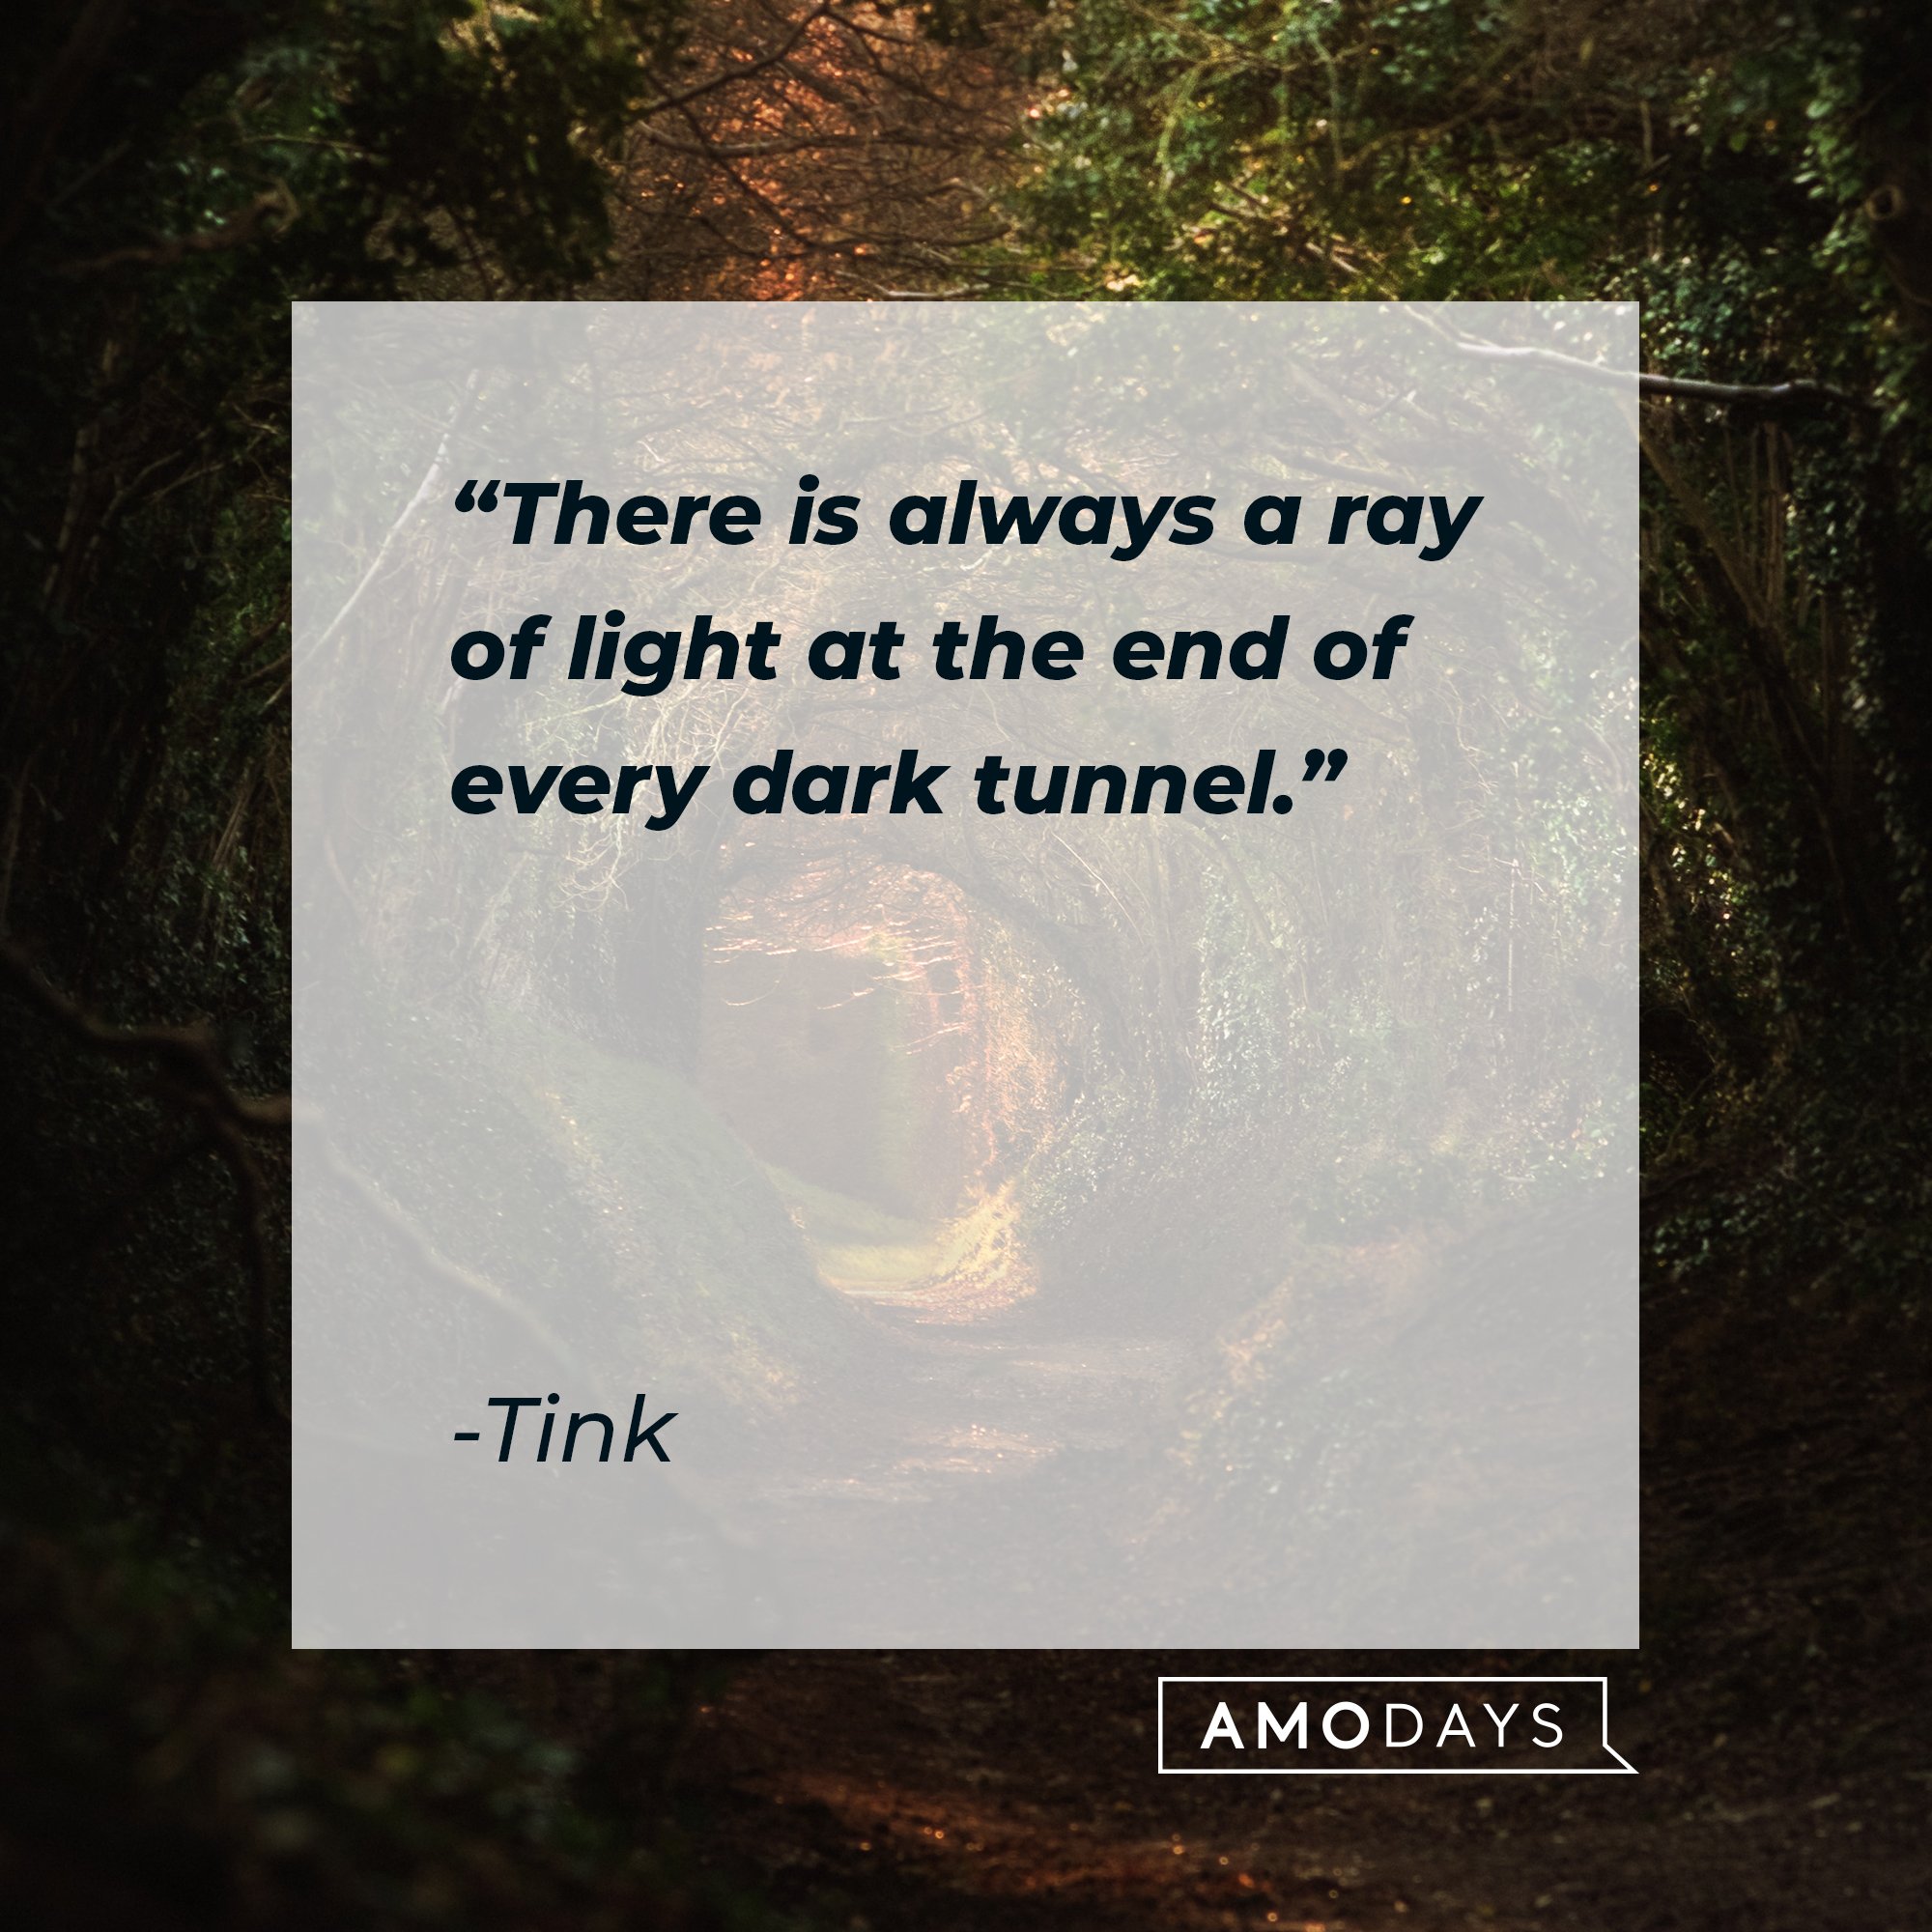 Tink’s quote: "There is always a ray of light at the end of every dark tunnel." | Image: AmoDays